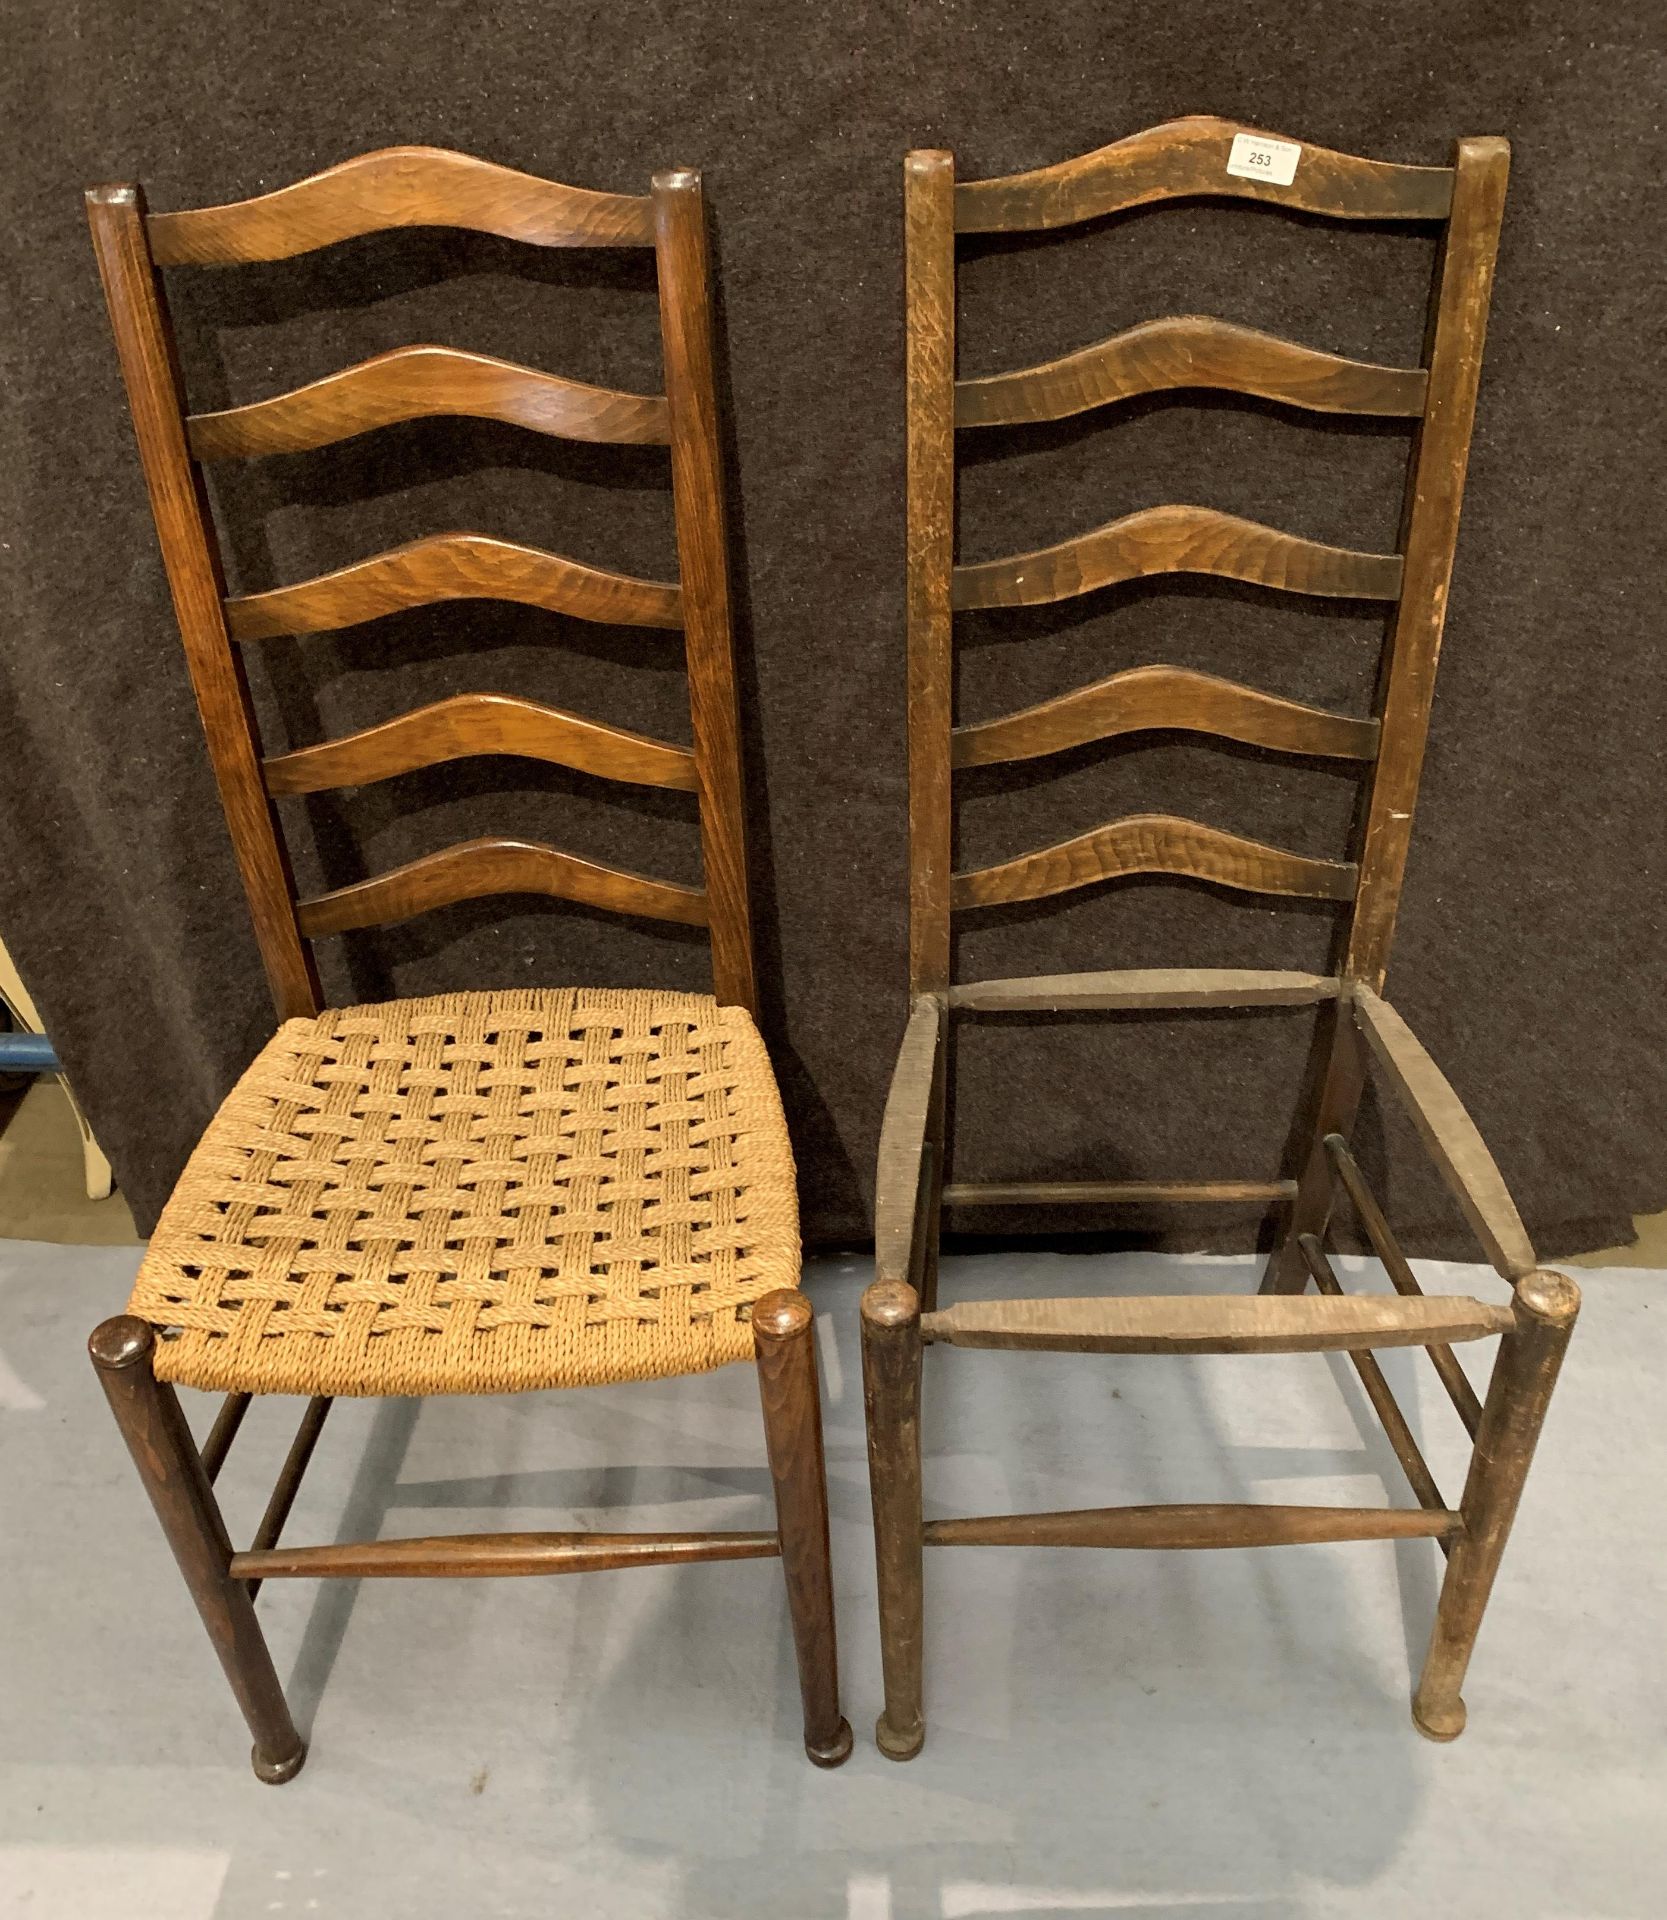 Two ladderback bedroom chairs - one lacks seat - Image 2 of 2